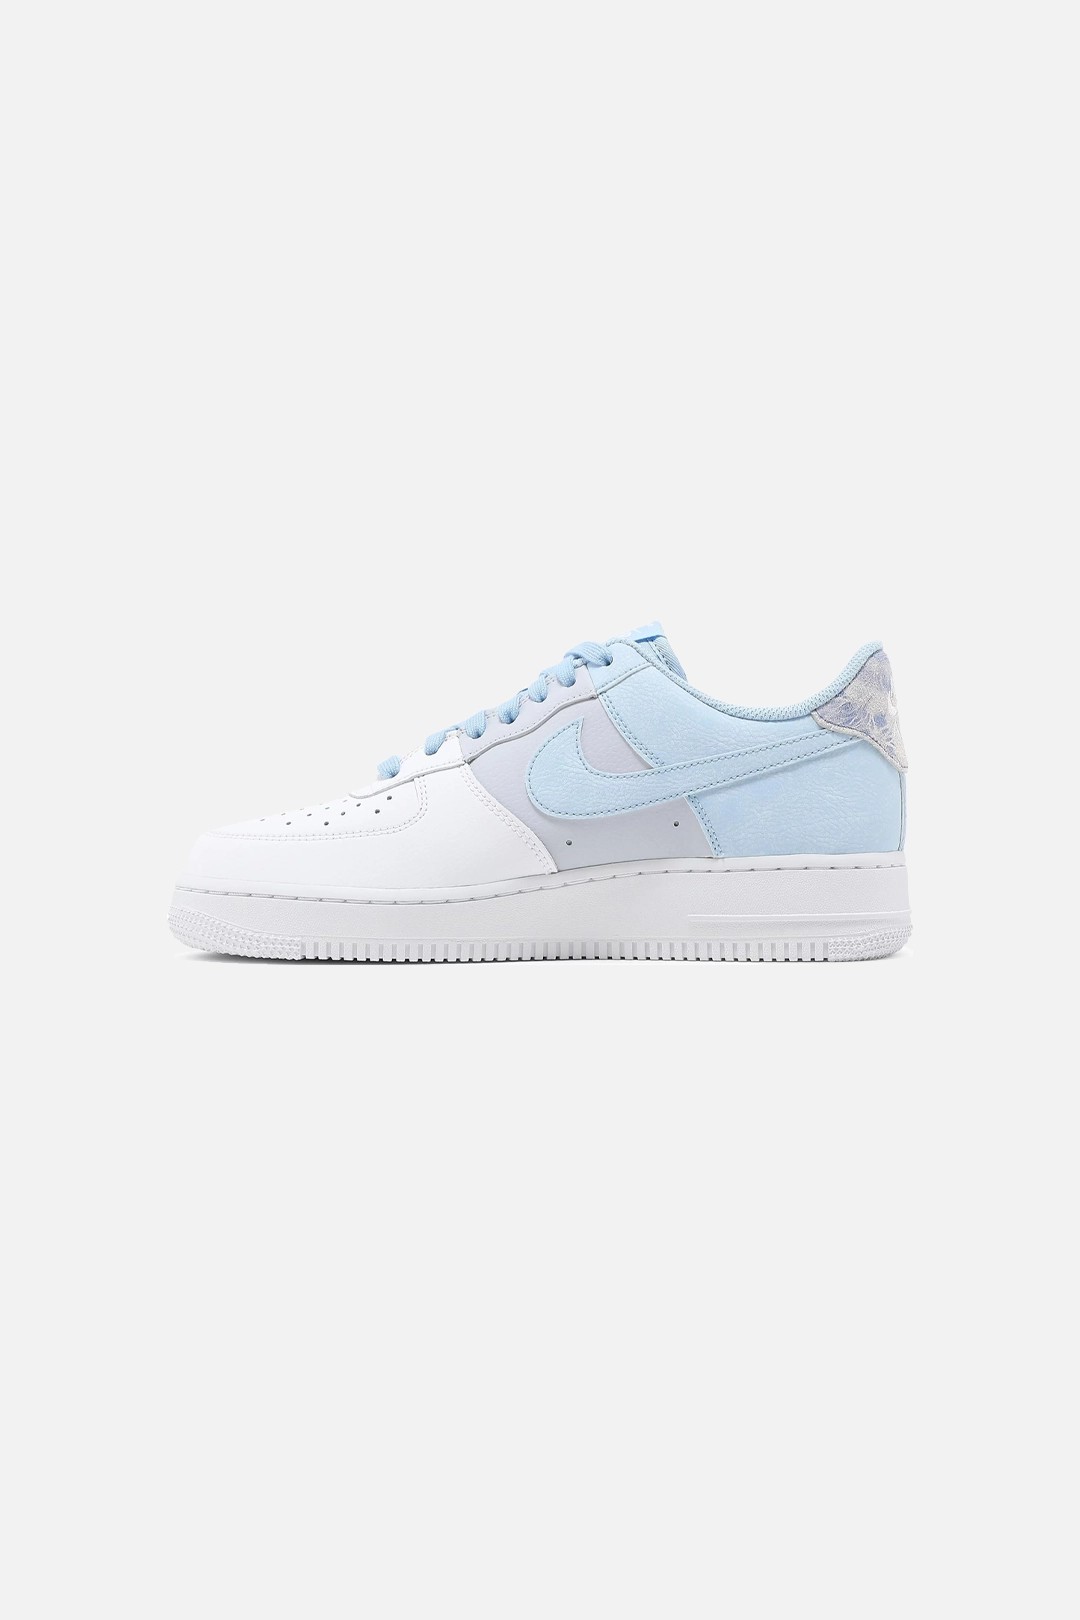 Air Force 1 '07 LV8 'Psychic Blue'